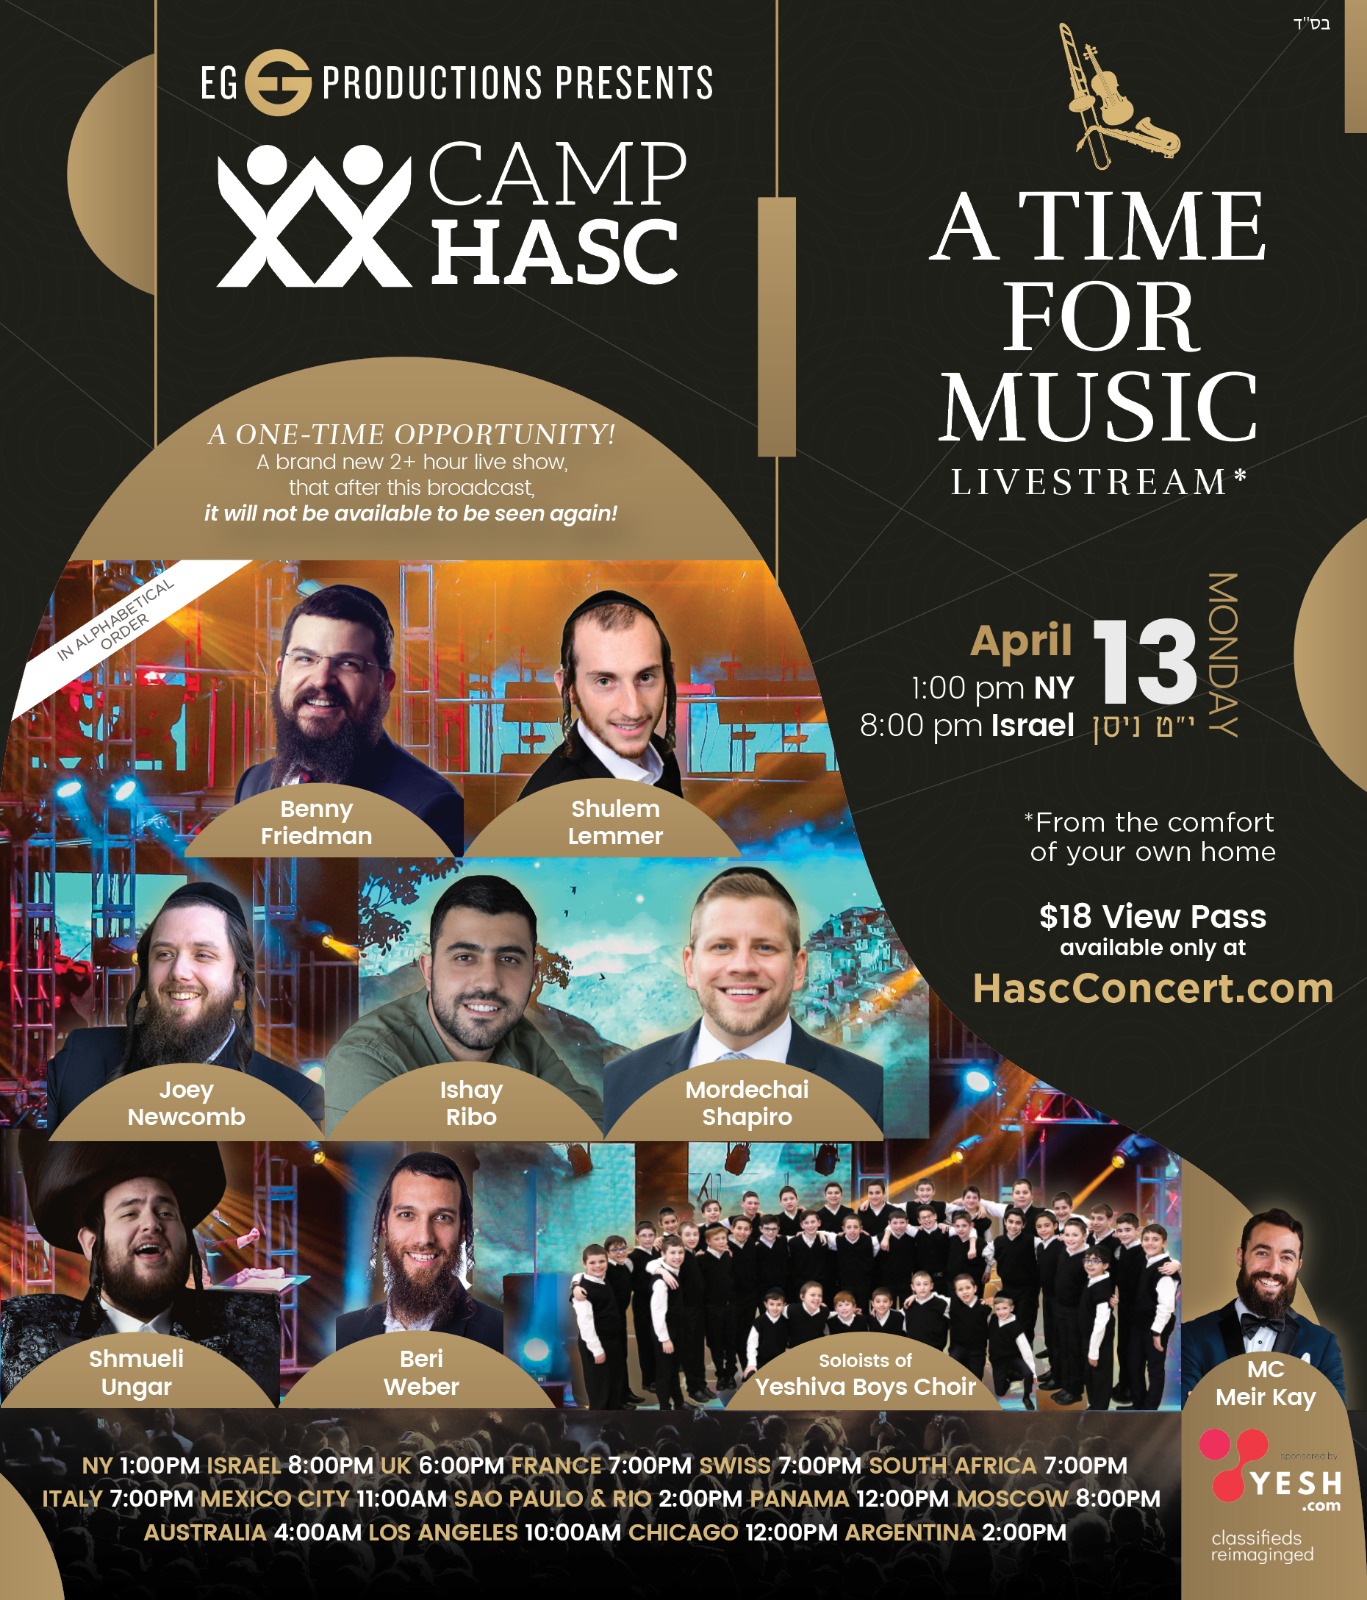 Camp HASC is proud to present A Time for Music Livestream! The